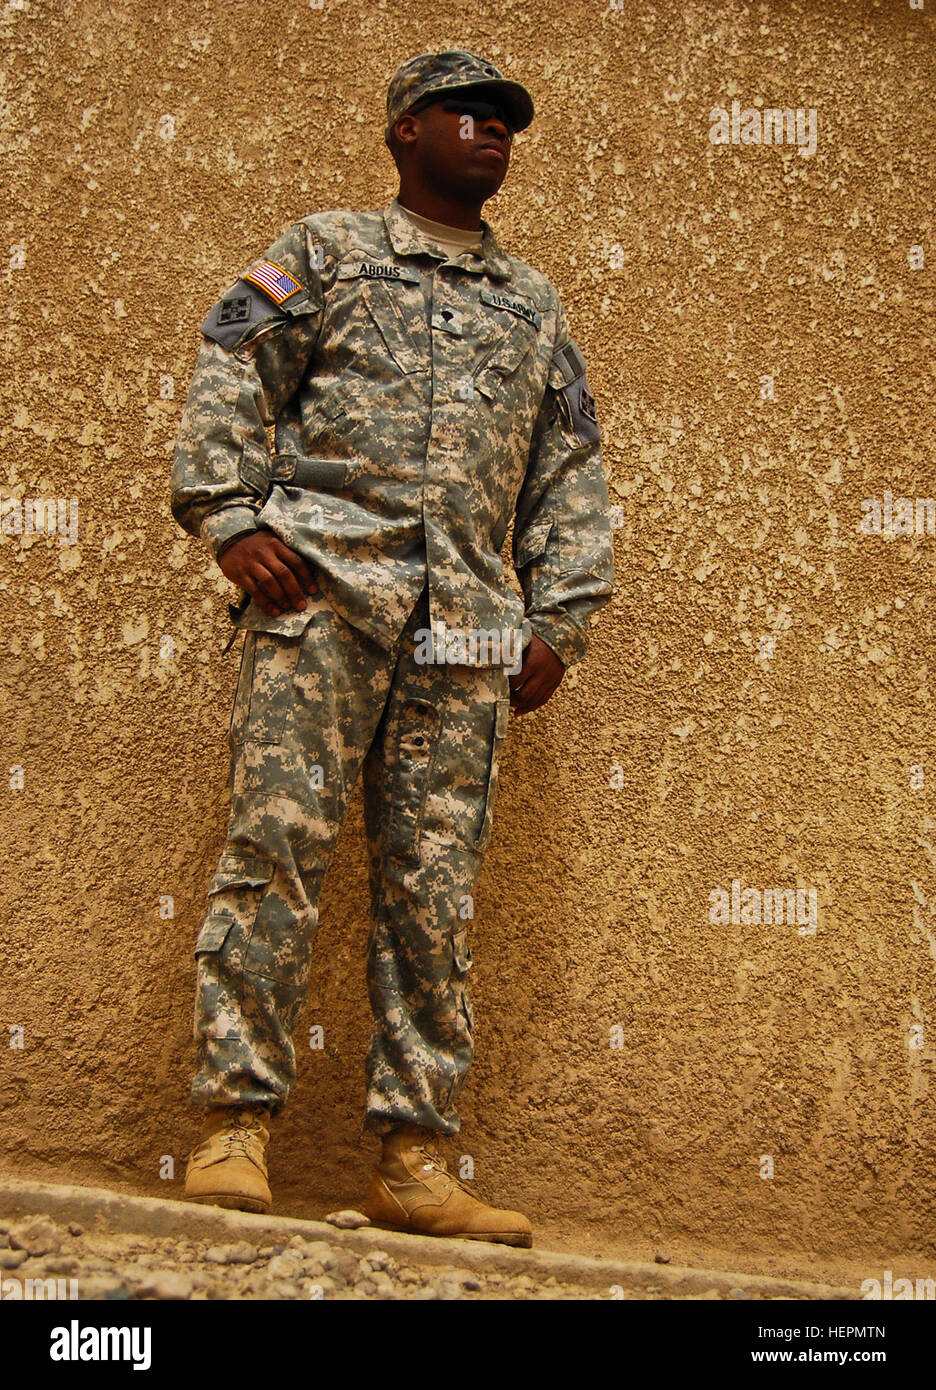 CAMP TAJI, Iraq--Spc. Damone Abdus Salaam, paralegal specialist, Headquarters and Headquarters Company, Combat Aviation Brigade, 4th Infantry Division, Multi - National Division - Baghdad, stands outside his office building during a break from work Sept. 10. Seven years after the terrorist attacks on the World Trade Center Sept. 11,  2001, Adbus, originally from New York City, still vividly remembers the horrific events that eventually spurred today's Global War on Terrorism. (U.S. Army photo by Sgt. Jason Dangel, CAB PAO, 4th Inf. Div., MND-B) Iron Eagle Soldier remembers firsthand account of Stock Photo